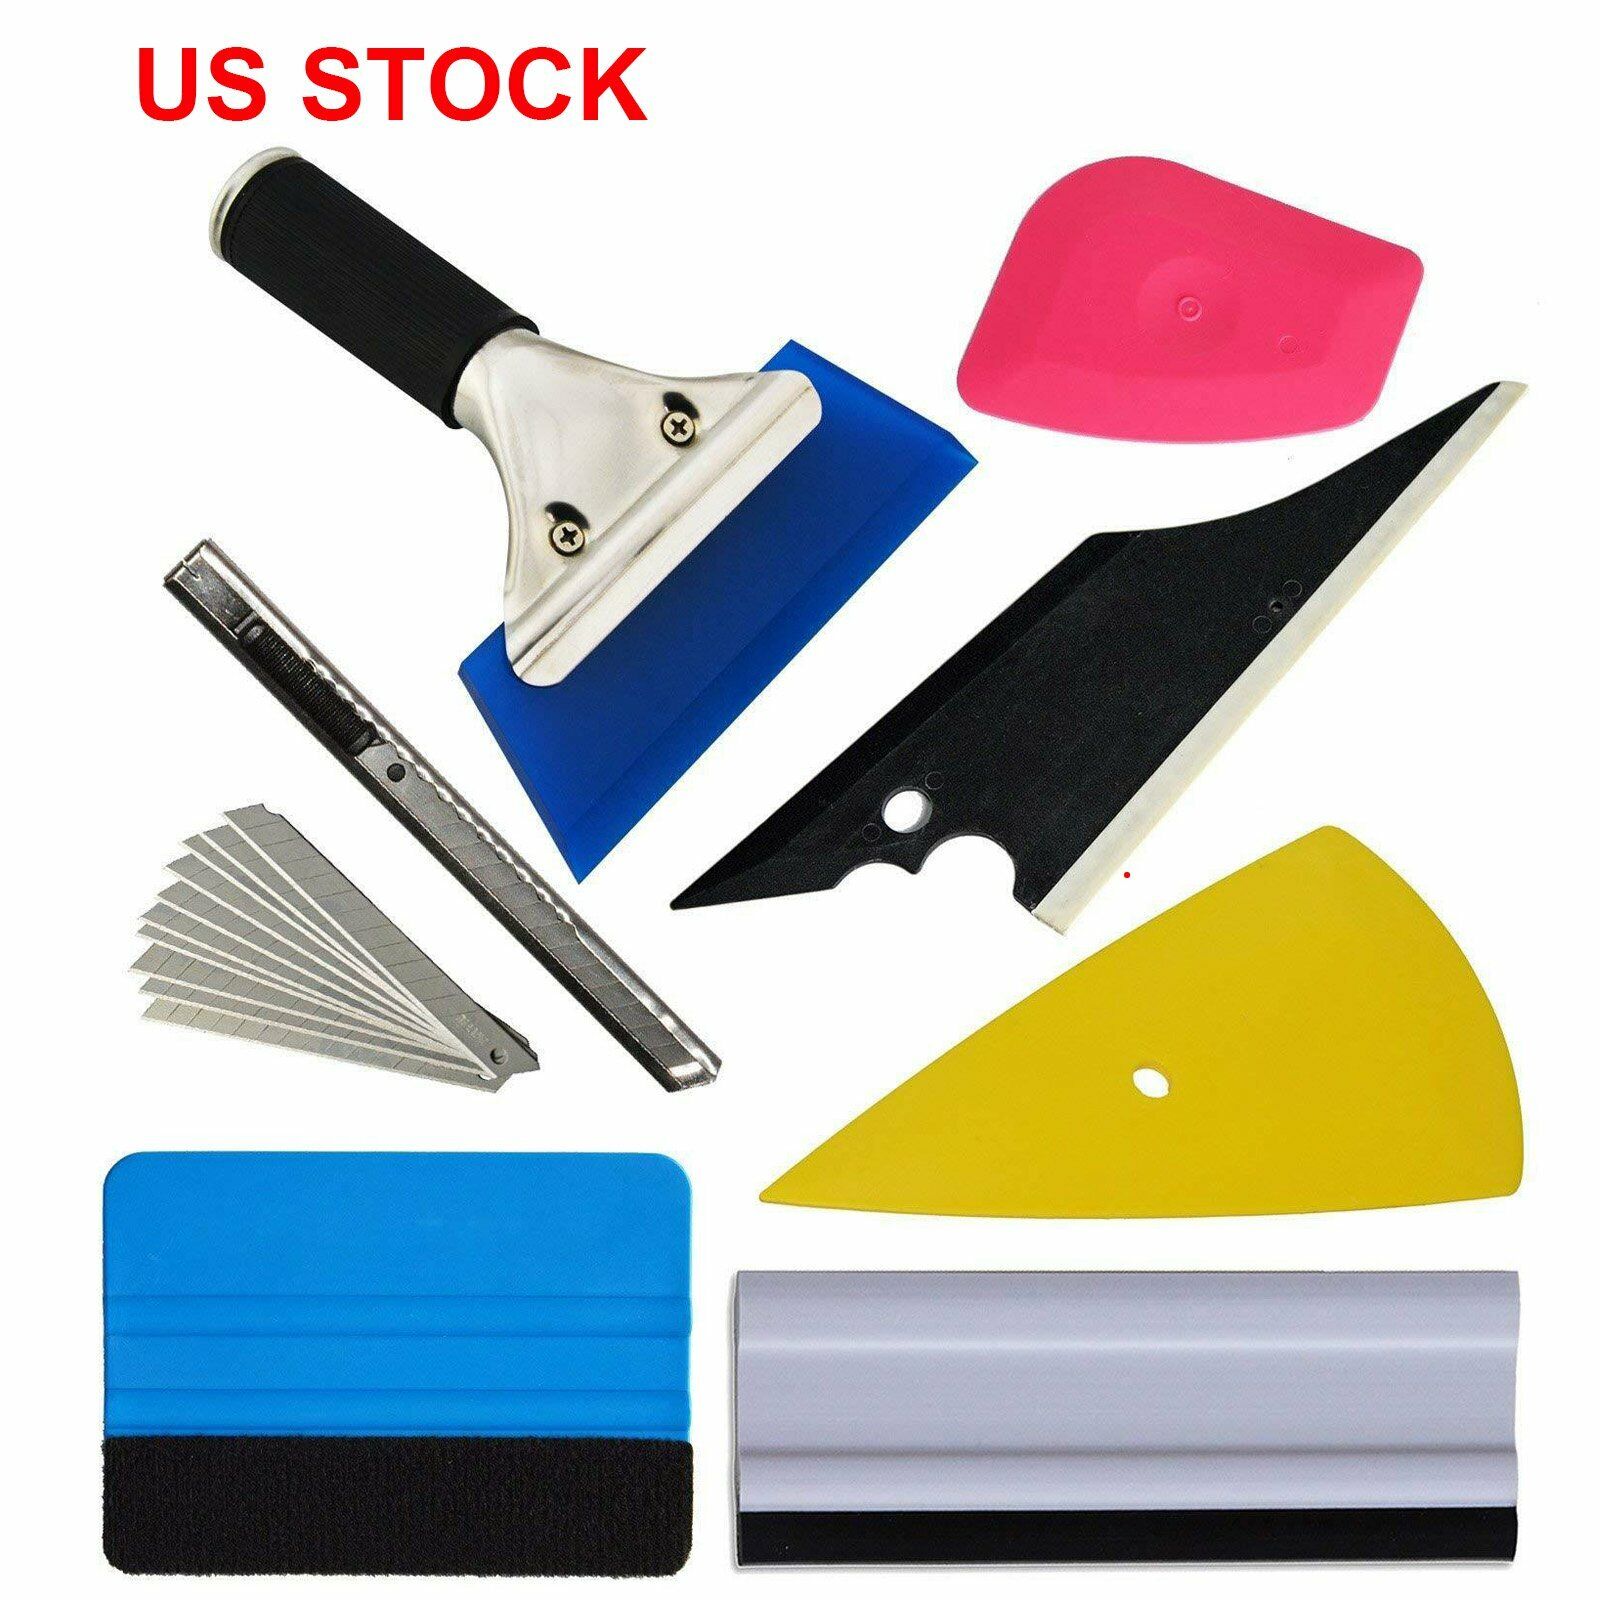 US Car Window Tint Tools Kit Scraper Squeegee for Auto Film Tinting Installation